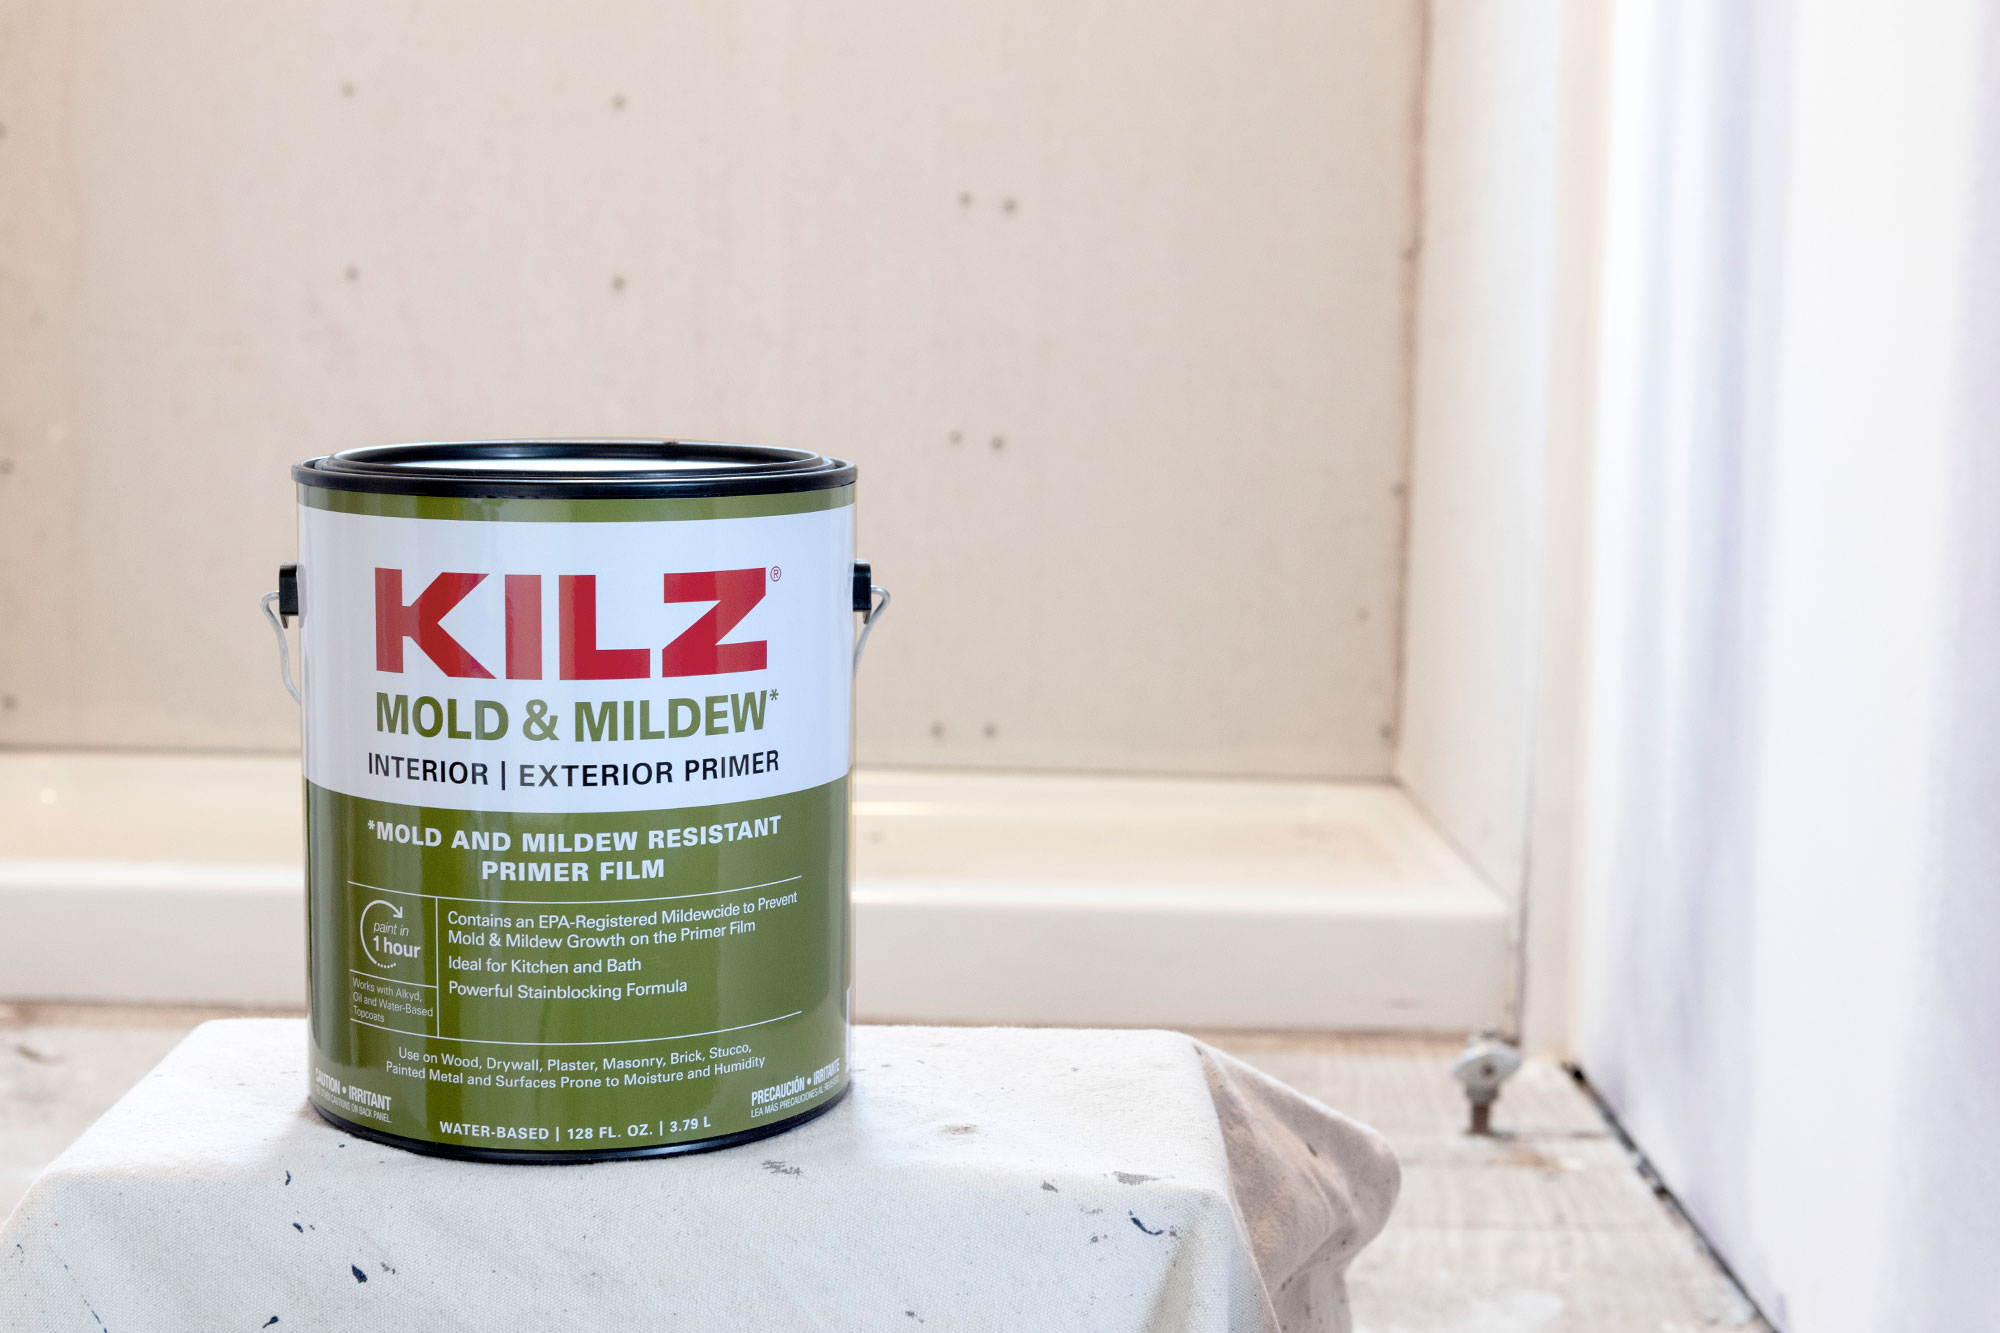 Image of KILZ Mold and Mildew 1-gallon can in a bathroom